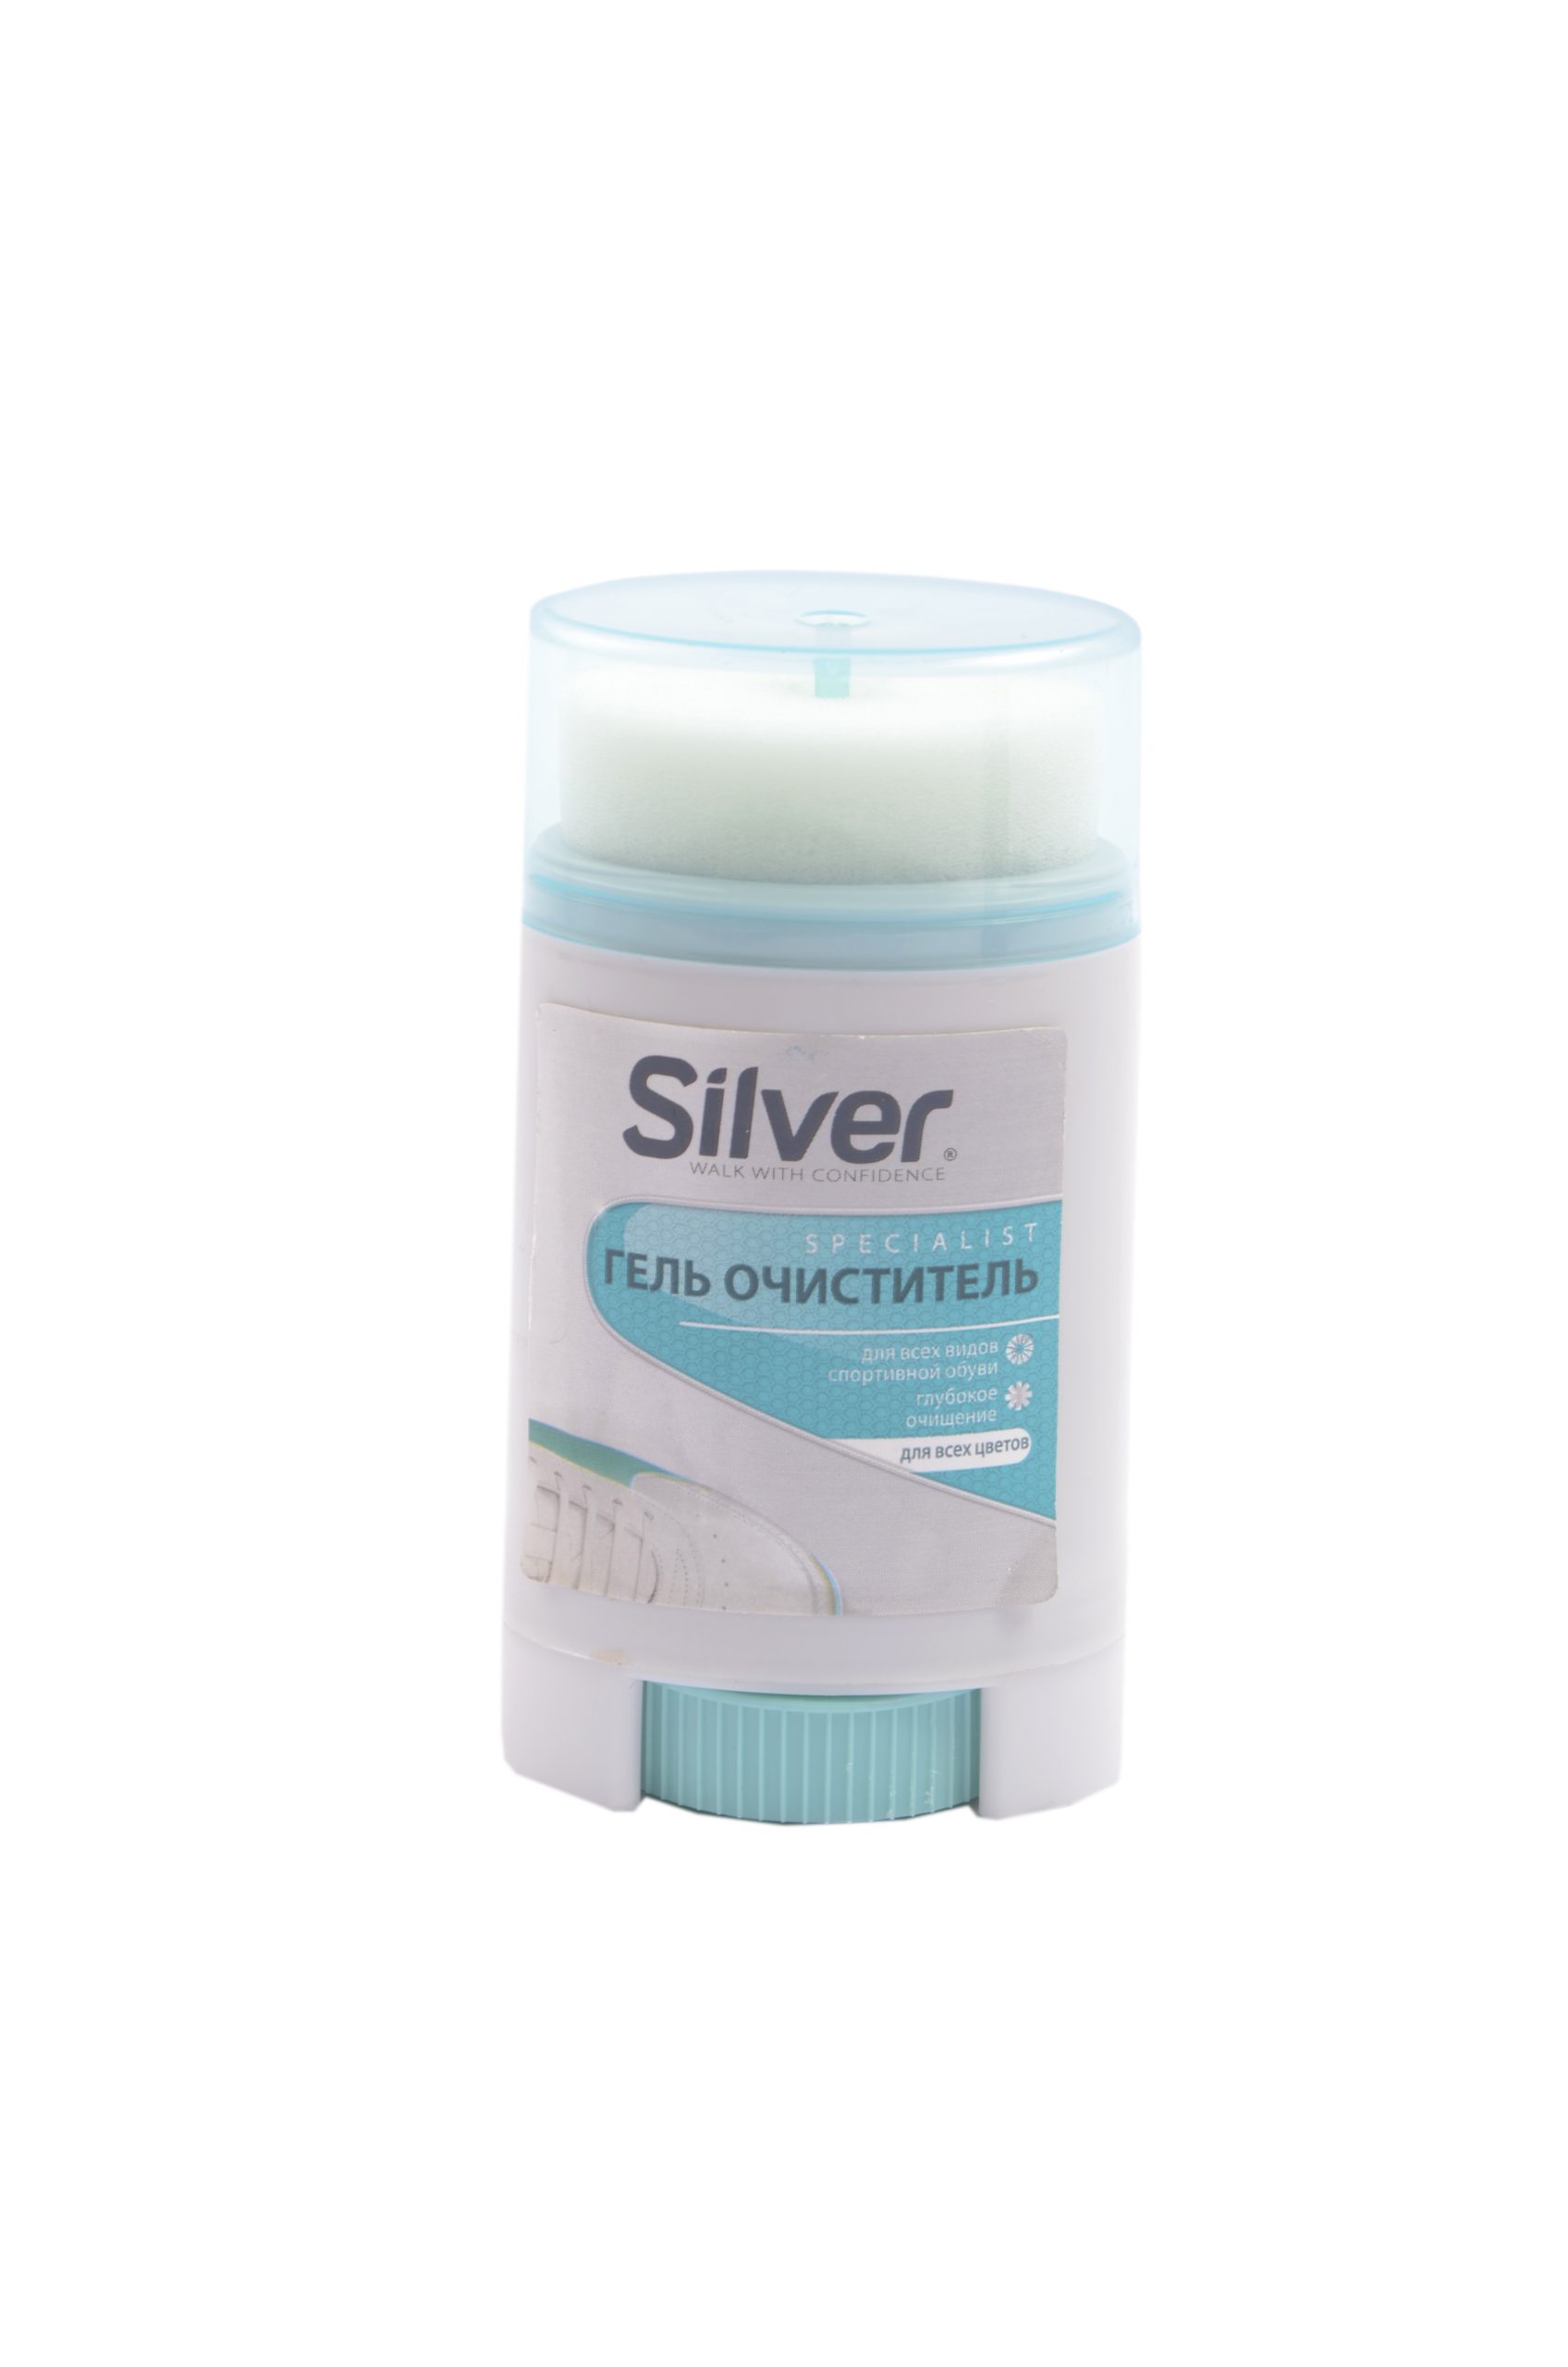 Silver 
	
	Shoe Cleaning Sponge
	 |  Detergents & Cleaners |  Cleaning Materials |  House Ware